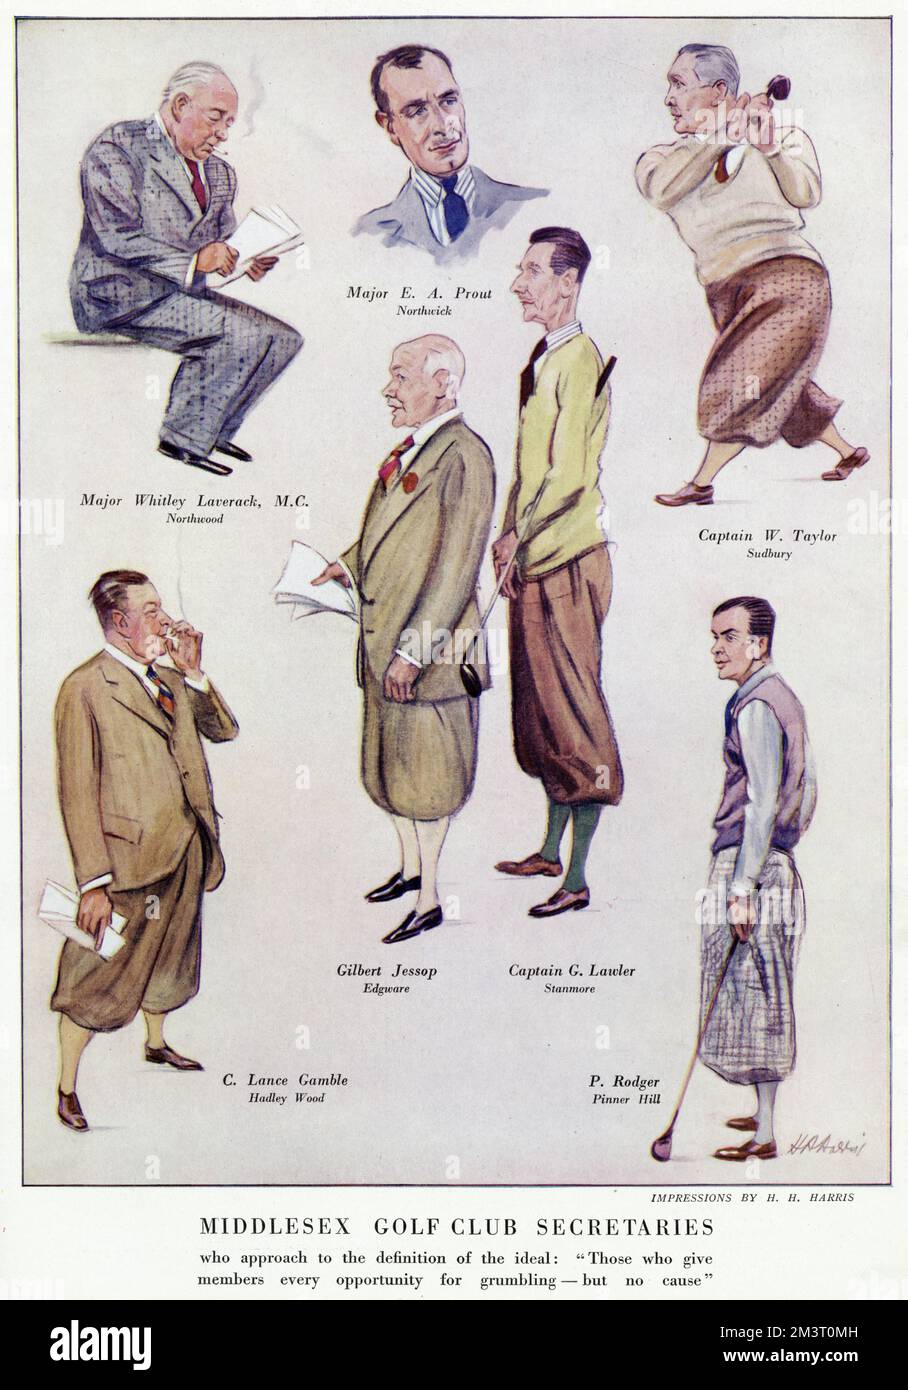 Secretaries of various golf clubs in the Middlesex area in 1932, caricatured by H. H. Harris. Those featured are Major E. A. Proute of Northwick, Captain W. Taylor of Sudbury, Major Whitley Laverack M.C. of Northwood, C. Lance Gamble of Hadley Wood, Gilbert Jessop of Edgware, Captain G. Lawler of Stanmore and P. Rodger of Pinner Hill..      Date: 1932 Stock Photo